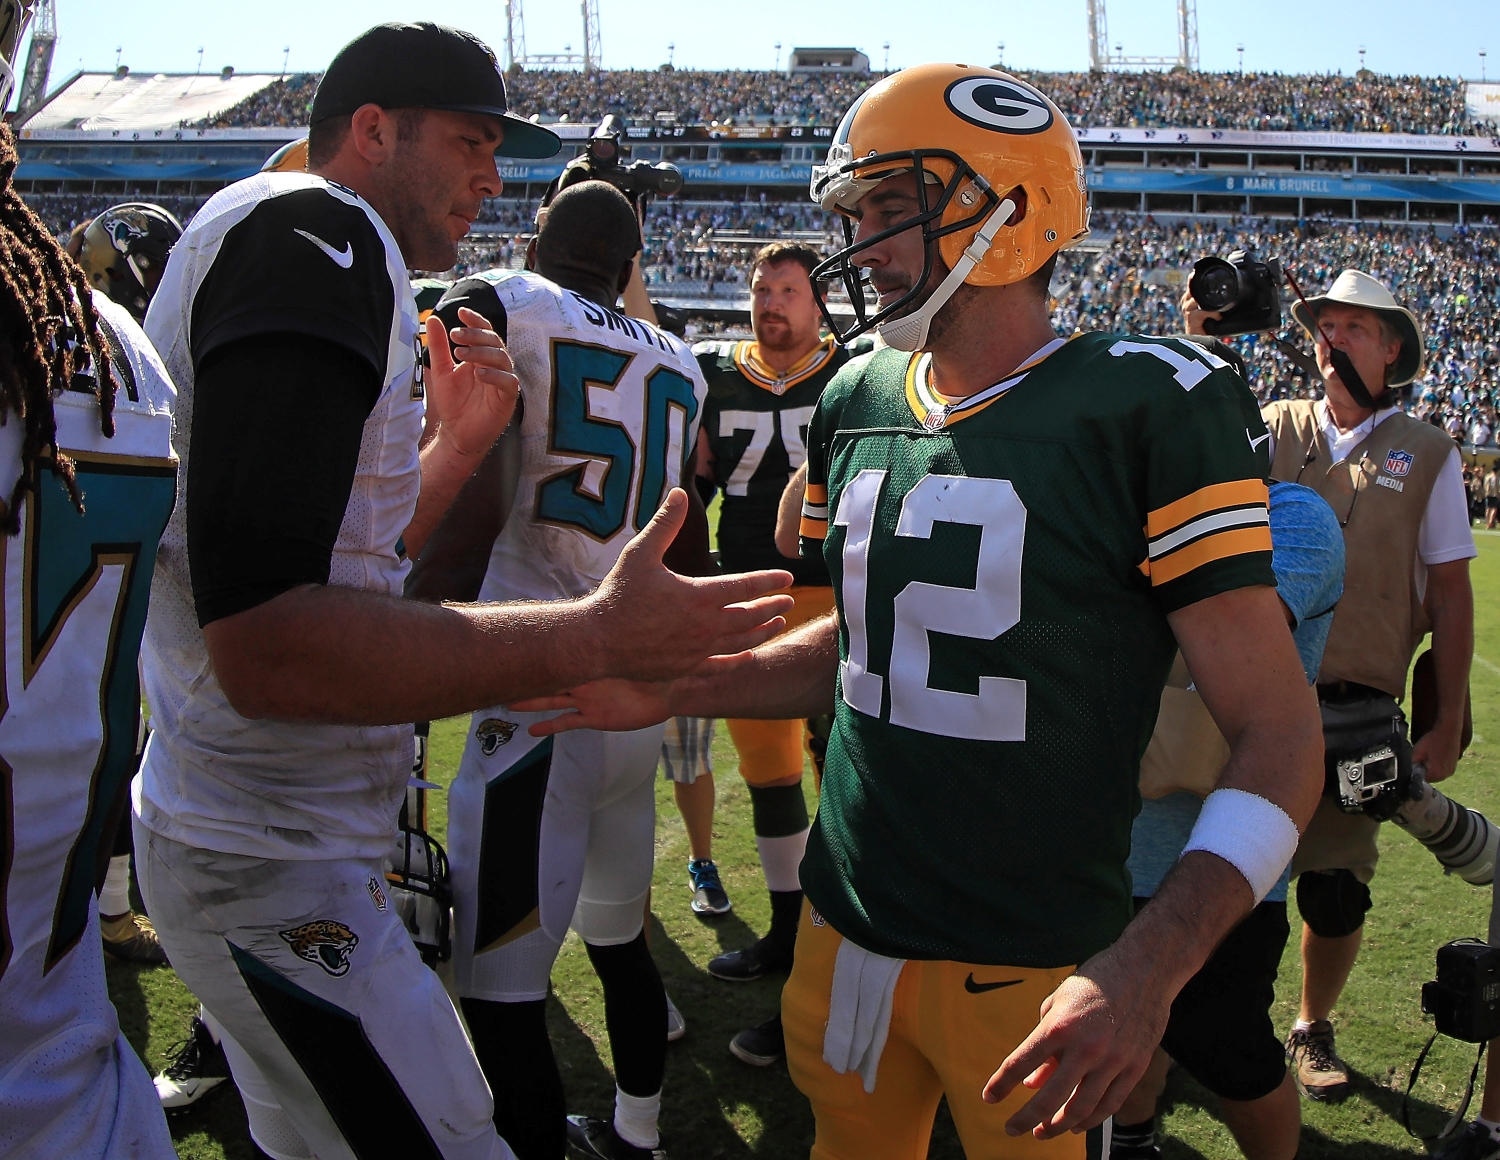 Blake Bortles and Aaron Rodgers shake hands after a game between the Jaguars and the Packers.